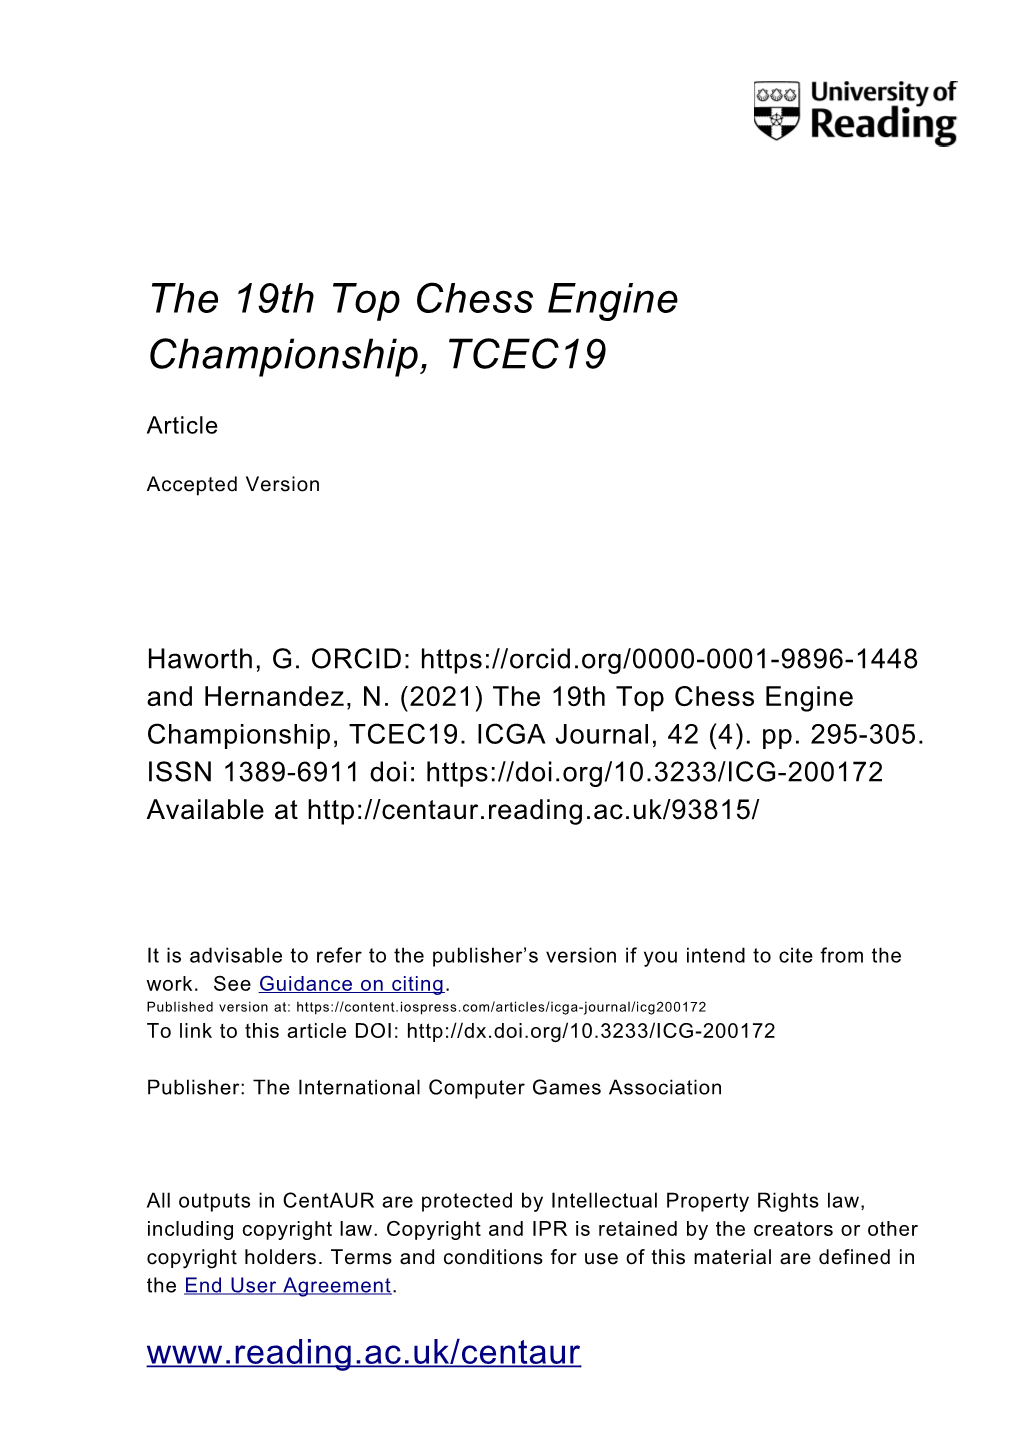 The 19Th Top Chess Engine Championship, TCEC19